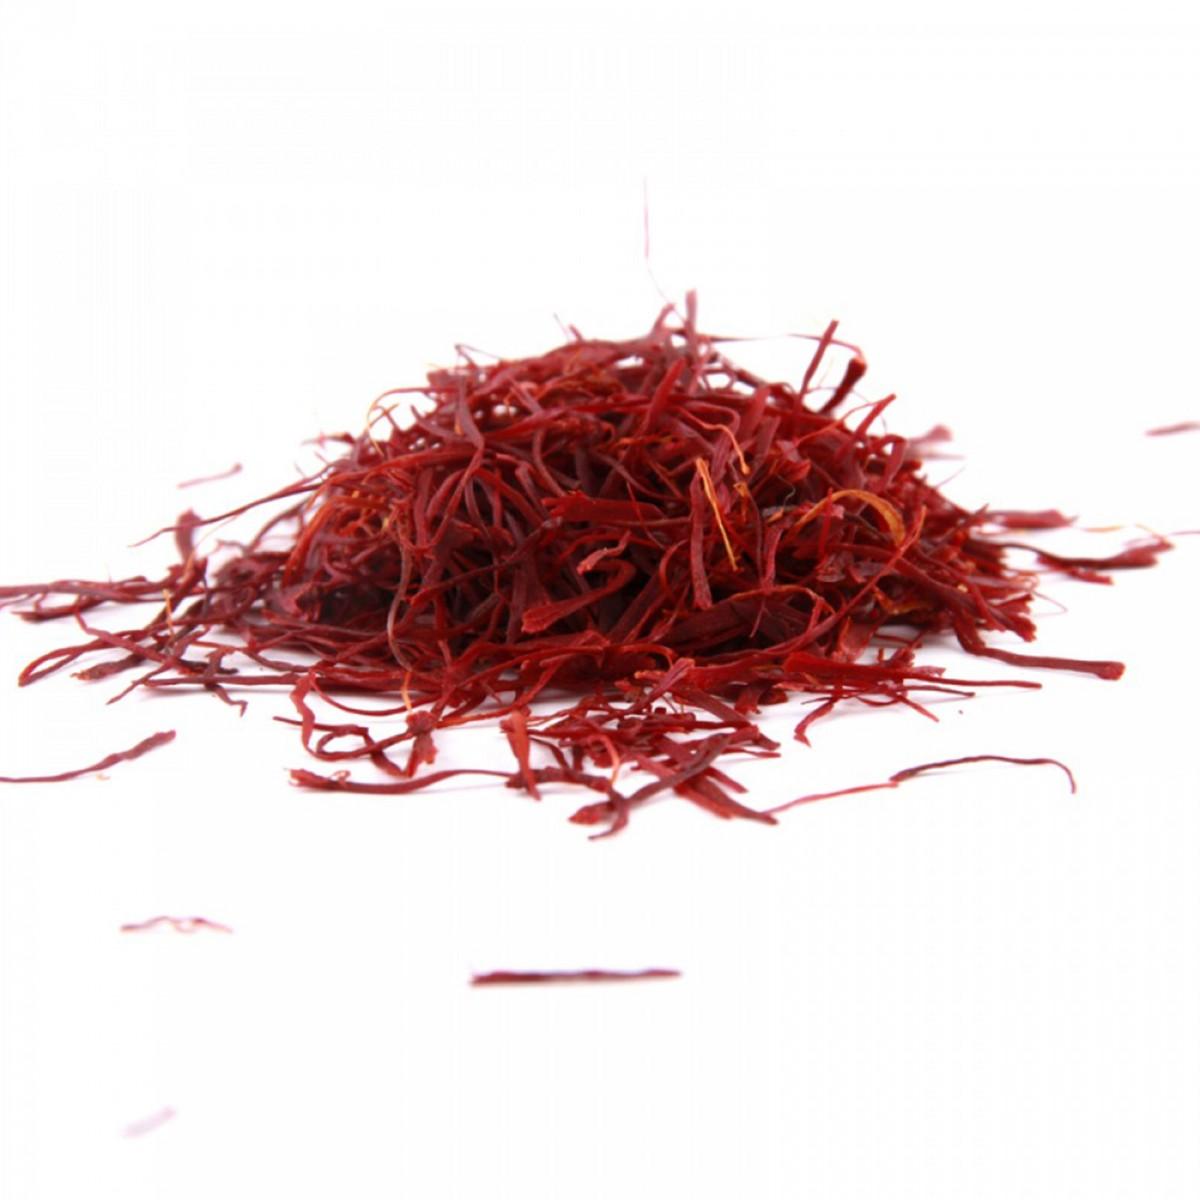 The 6 other uses of saffron